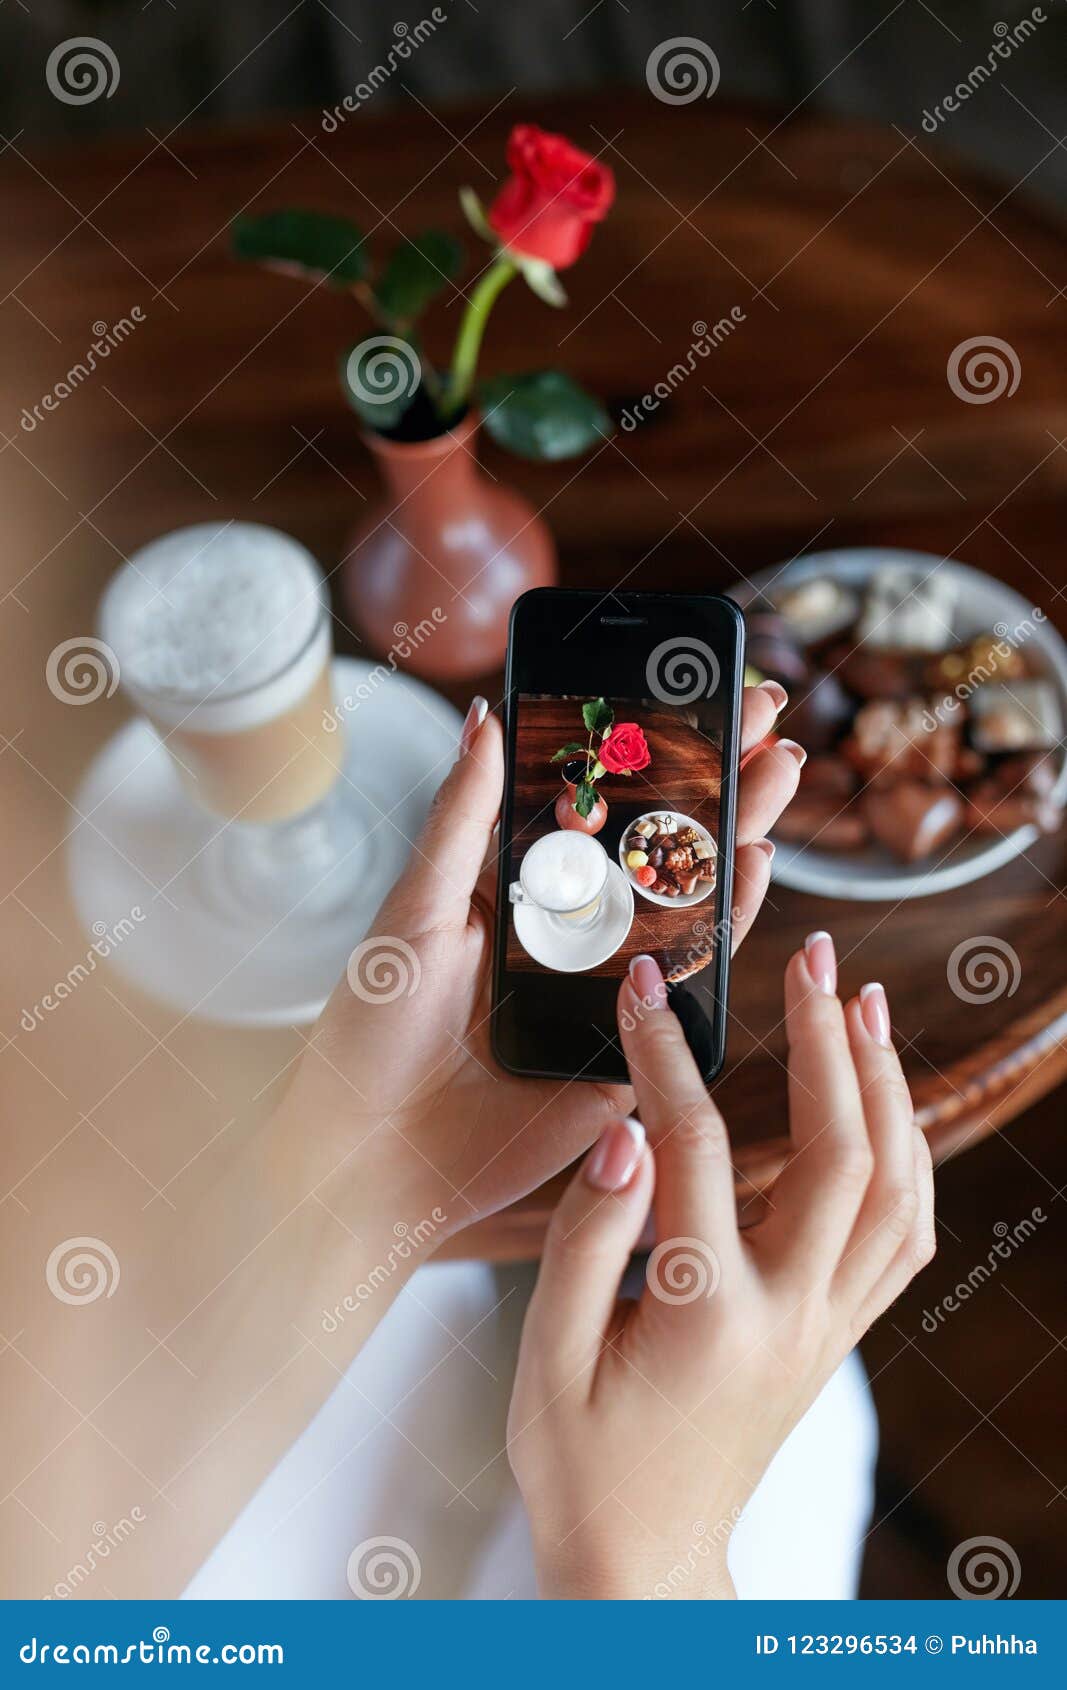  Food  Photo  On Mobile  Phone In Cafe Stock Photo  Image of 